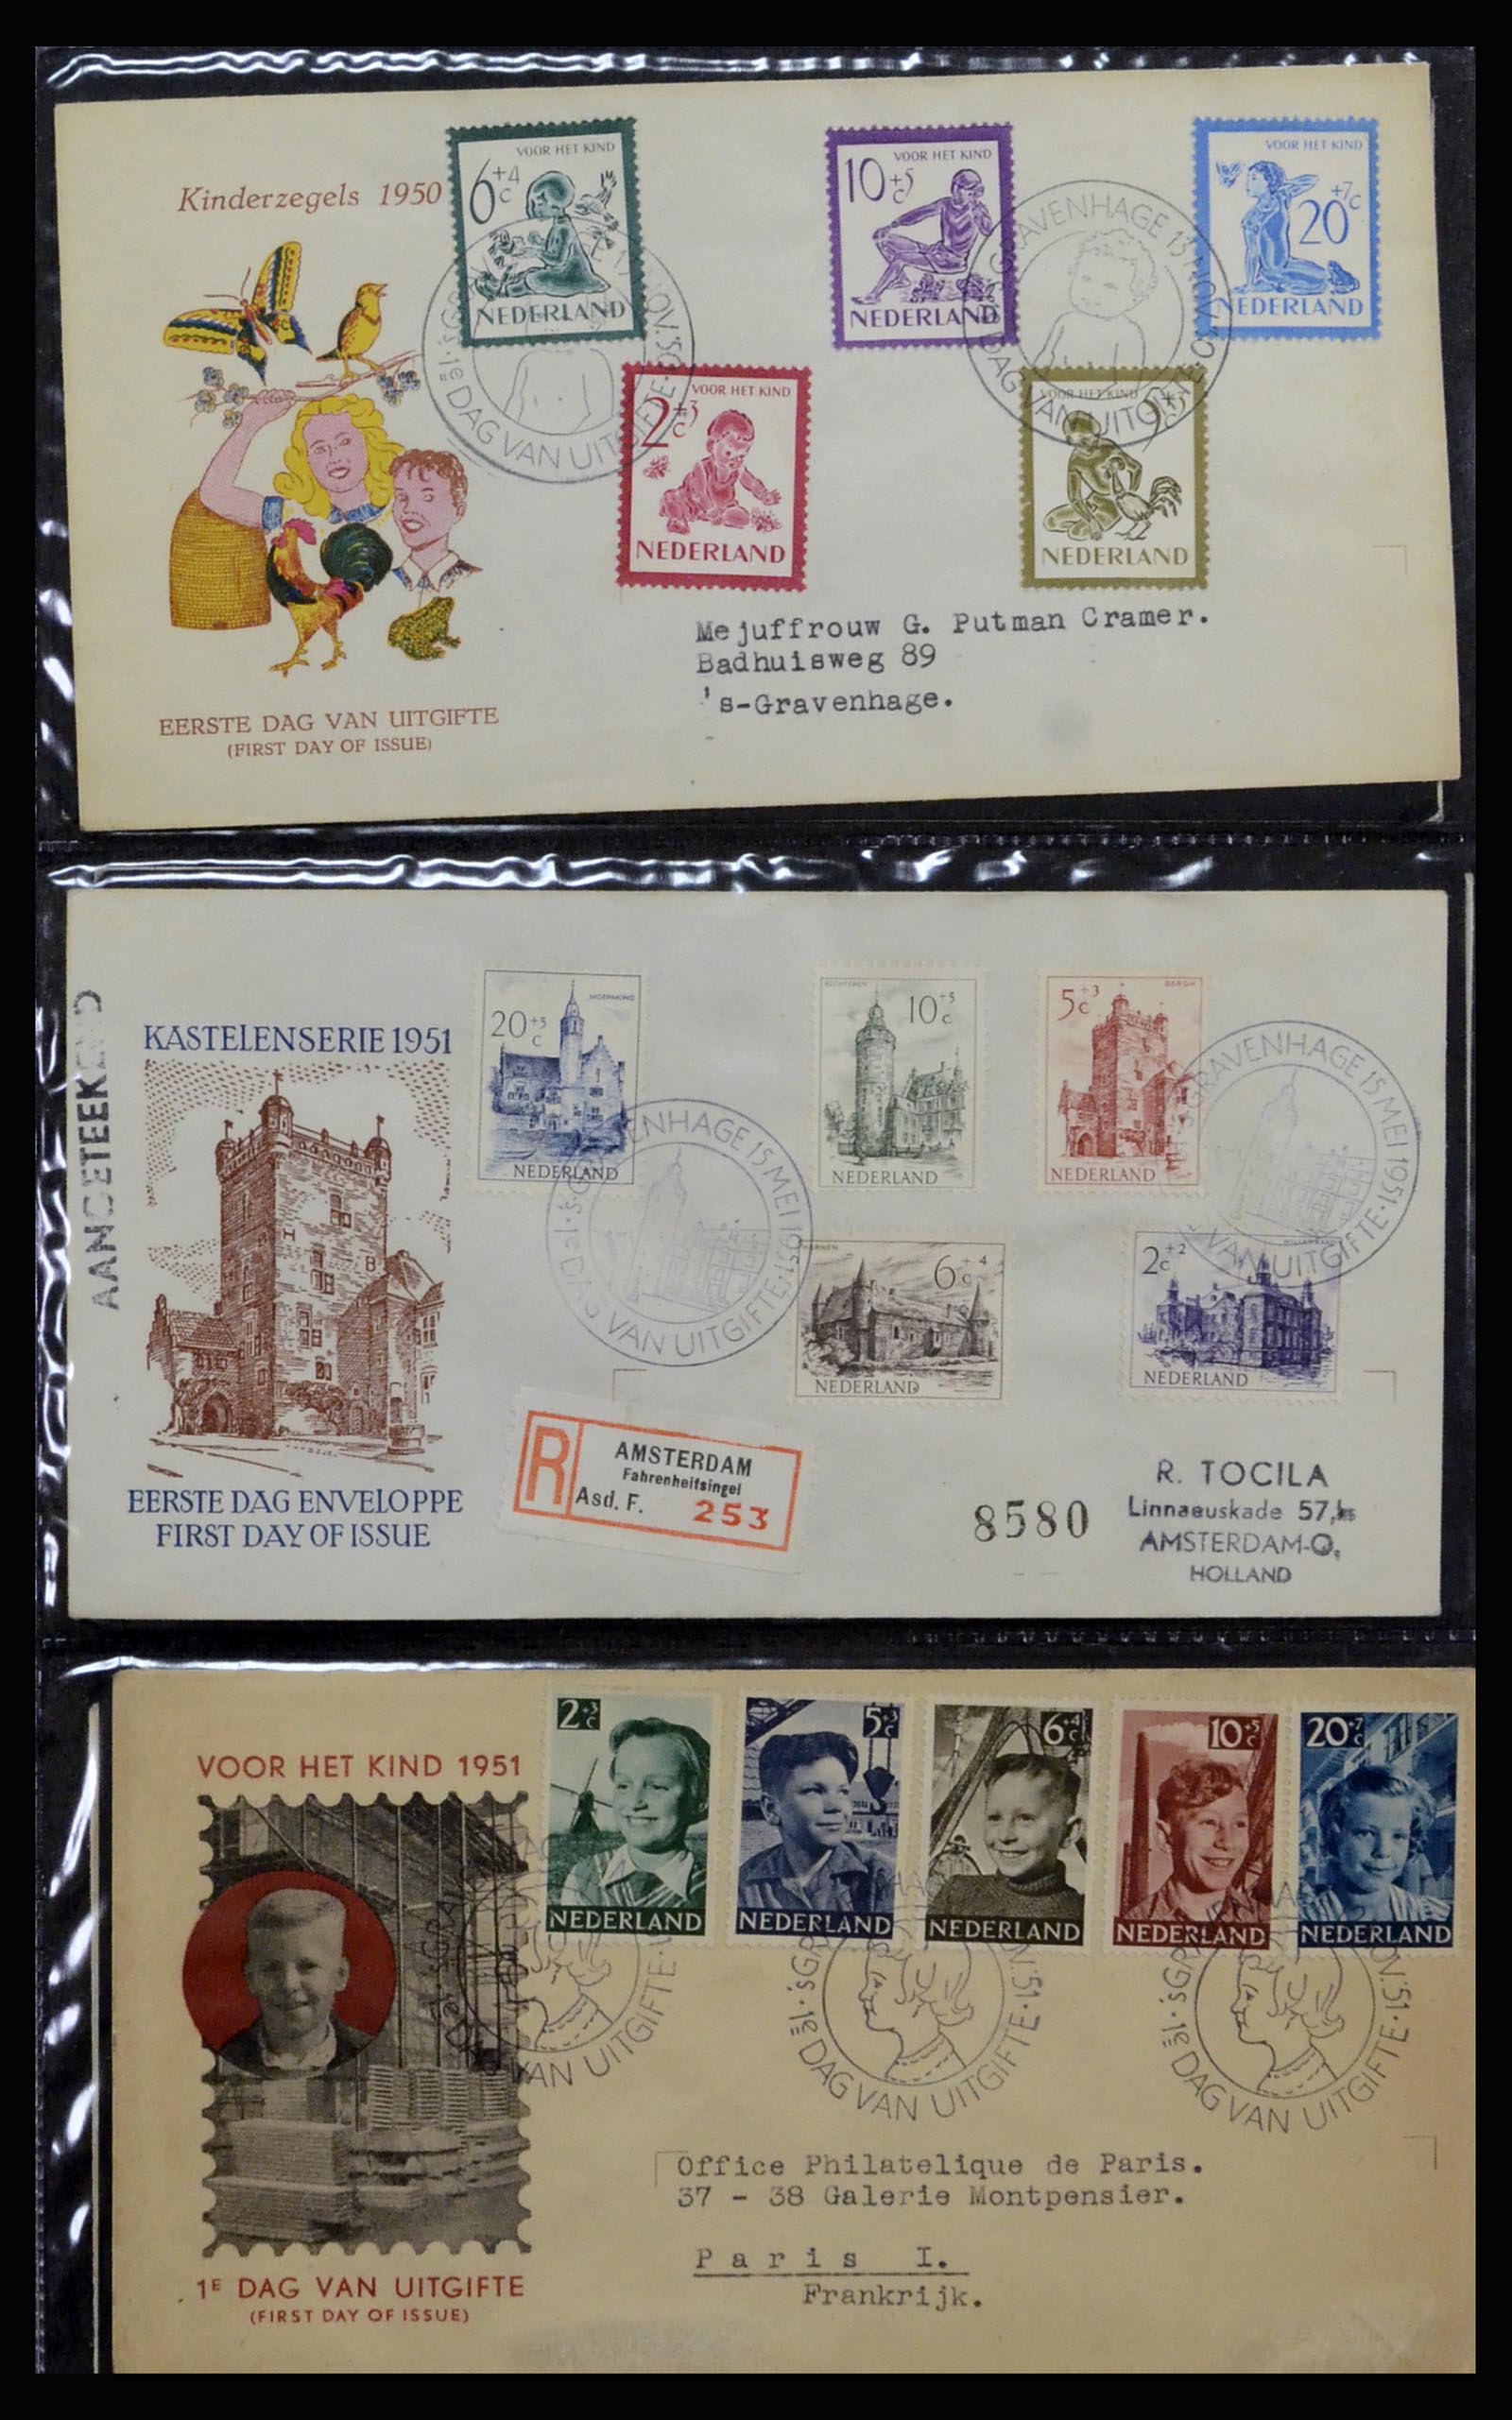 37197 003 - Stamp collection 37197 Netherlands FDC's 1950-2004.